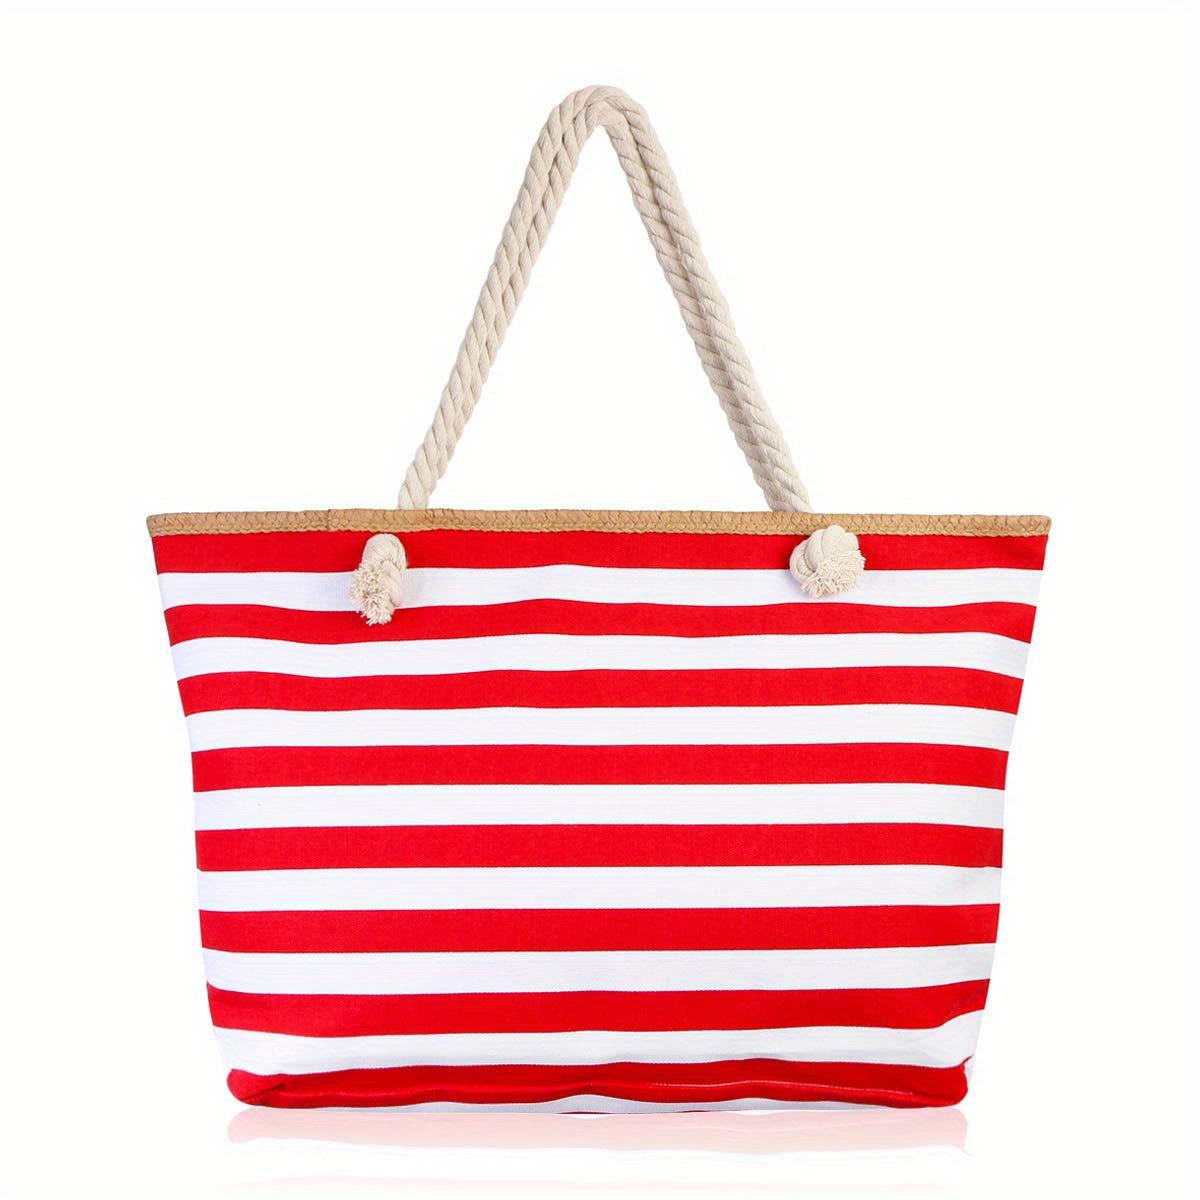 

Women's Striped Canvas Tote Bag With Rope Handles, Large Capacity Shoulder Beach Bag For Travel And Shopping